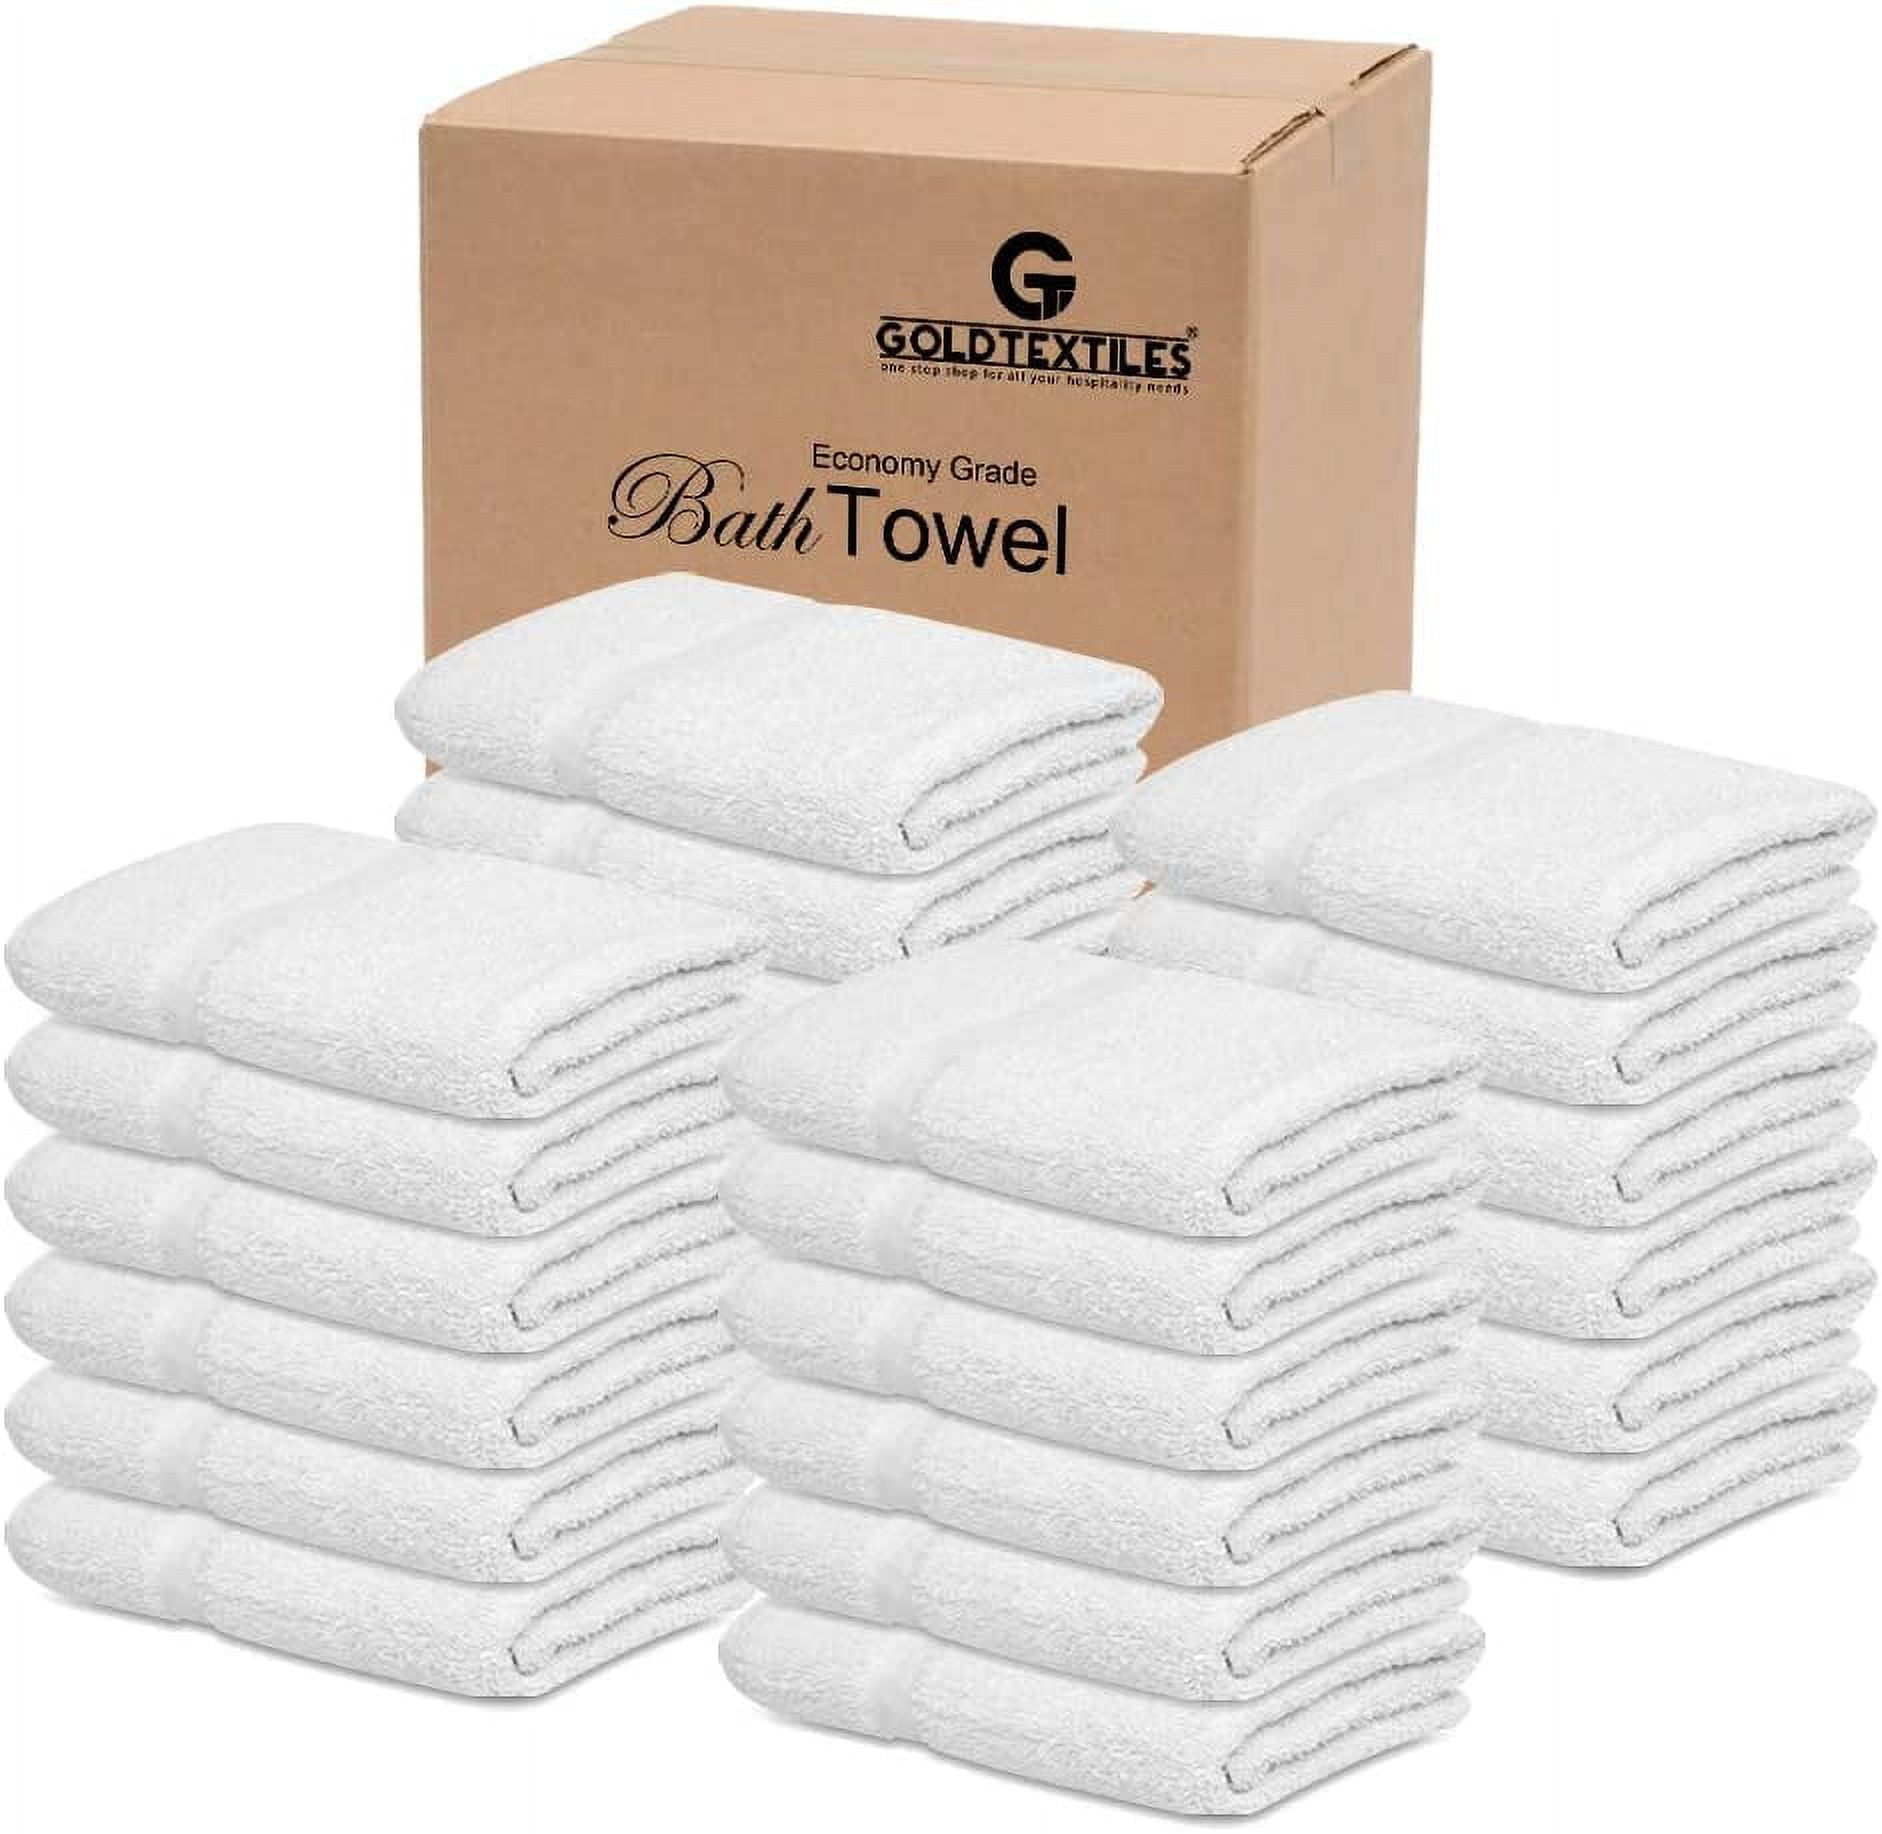 GOLD TEXTILES Bulk Bath Towels White 36 Pack 22x44 Inches Economy Cotton  Blend Easy Care